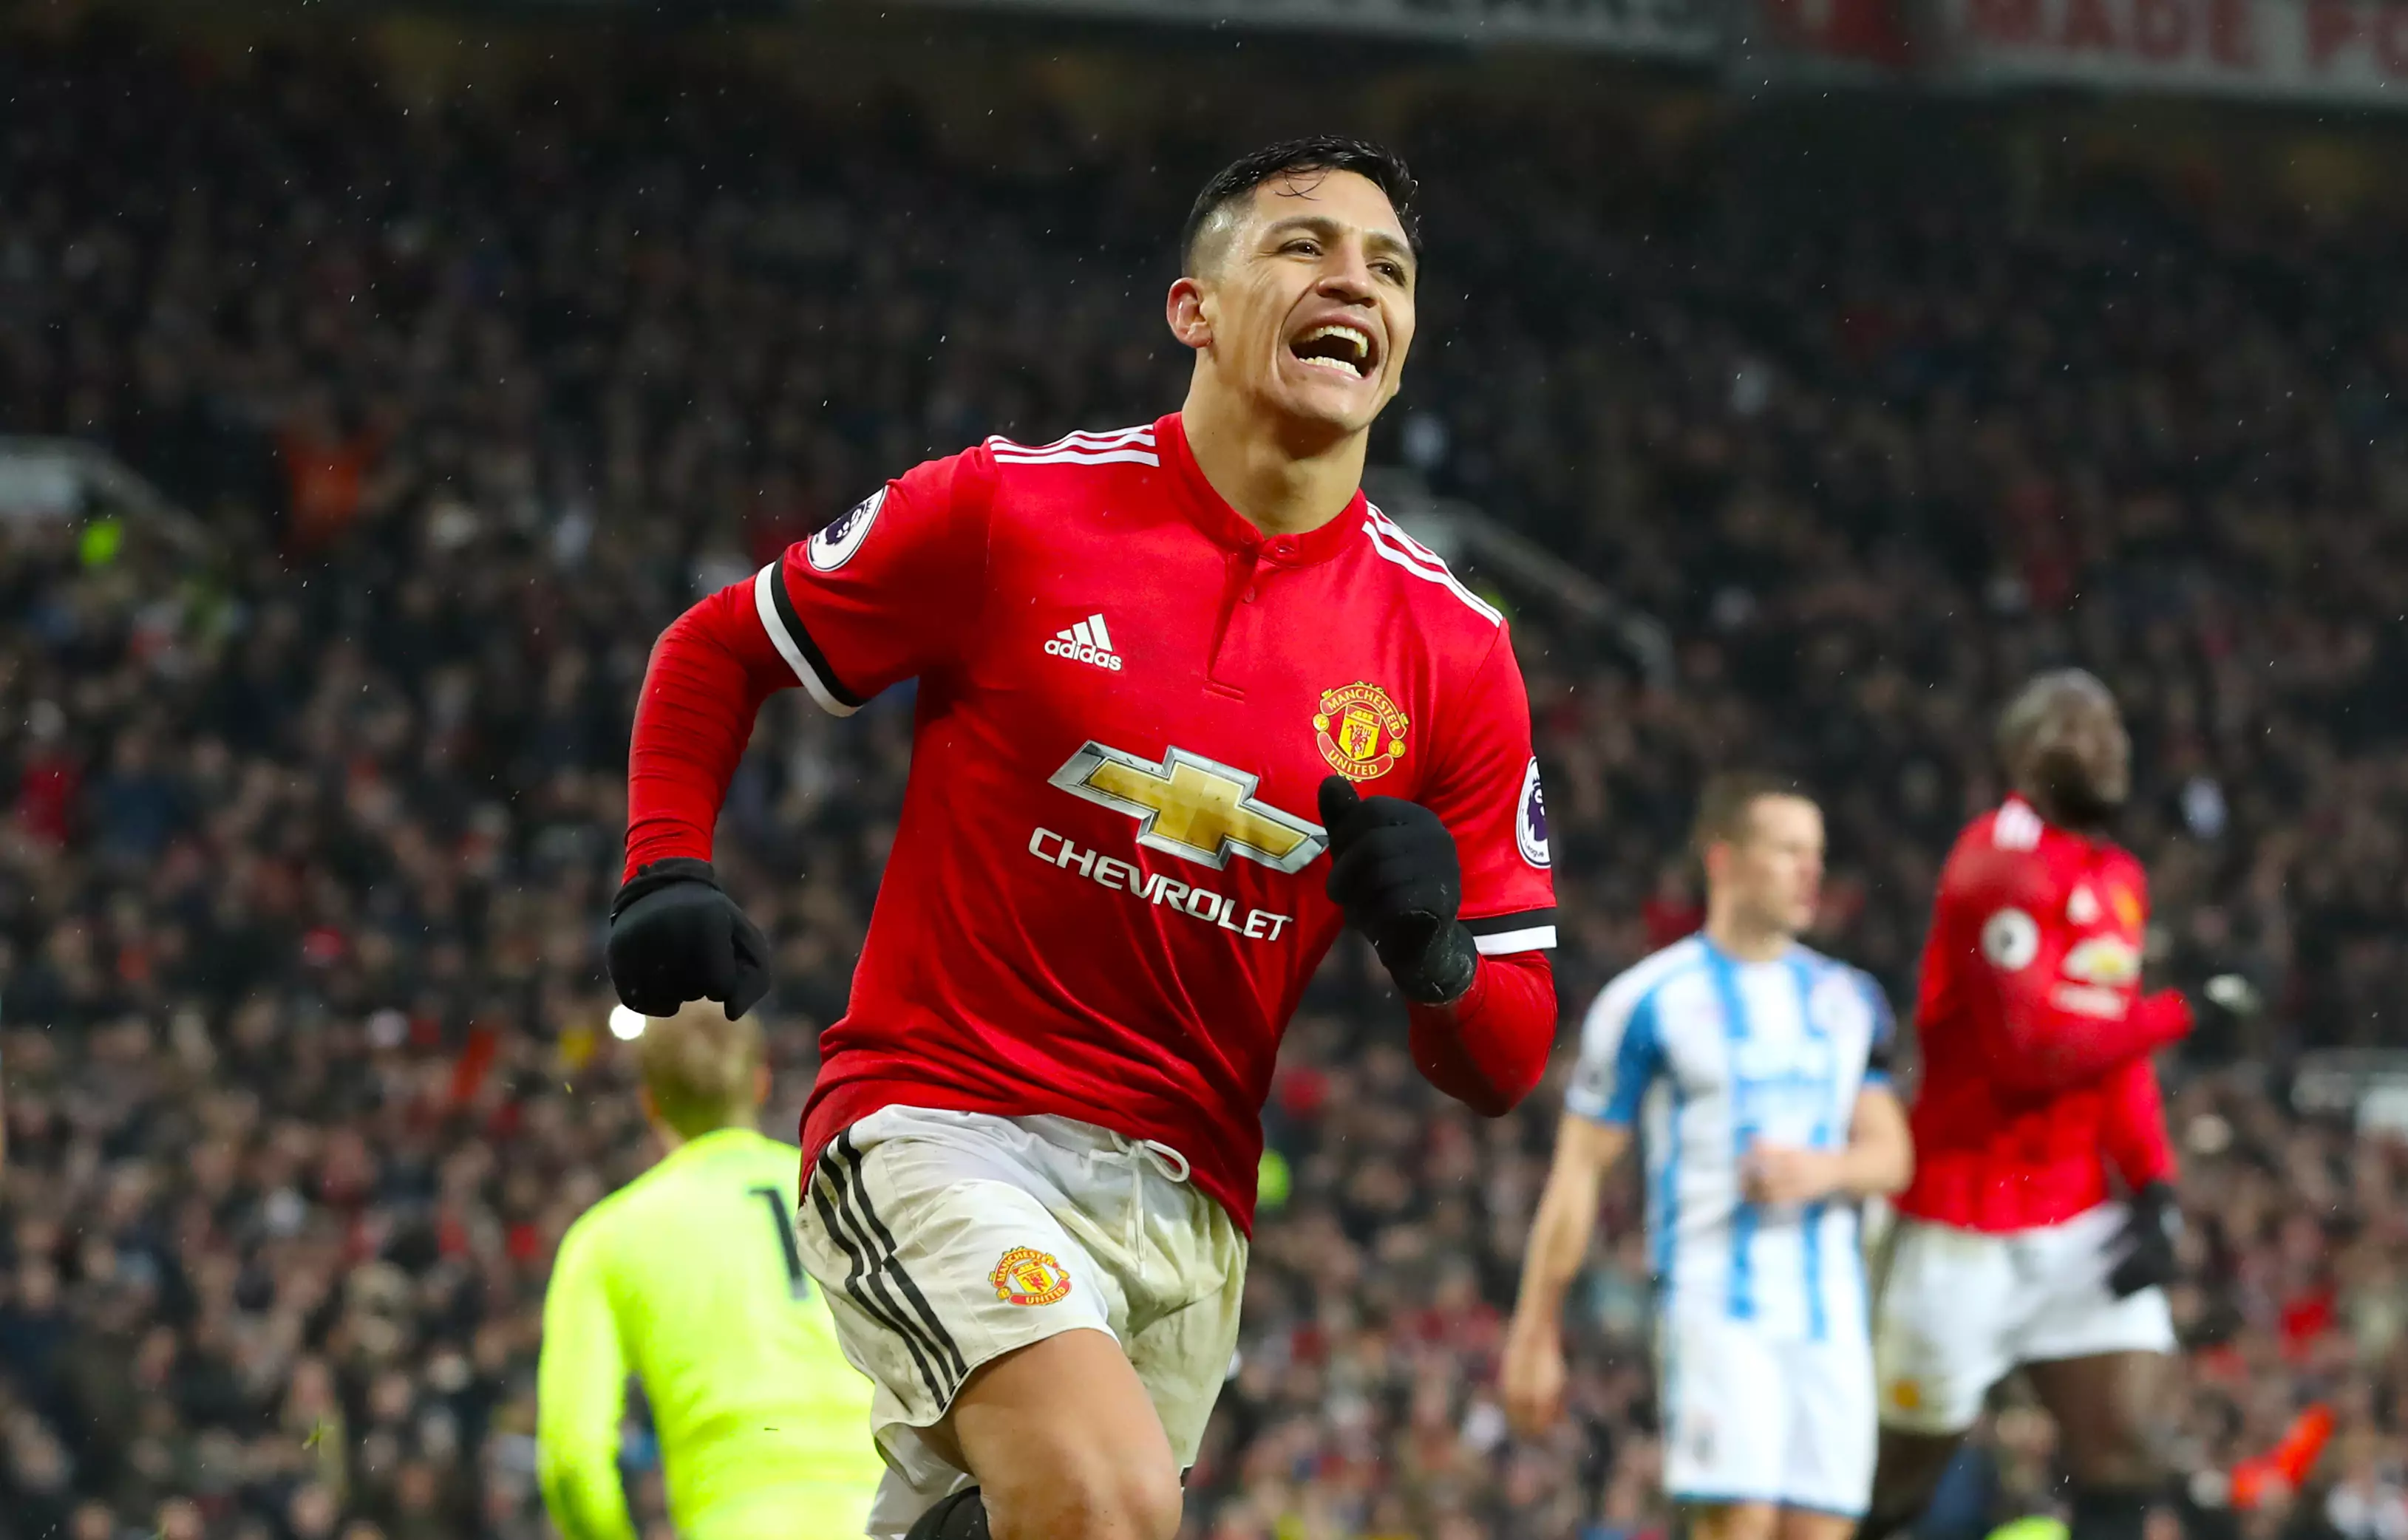 There were fears Sanchez's arrival could be a bad thing for Martial and potentially Marcus Rashford. Image: PA Images.